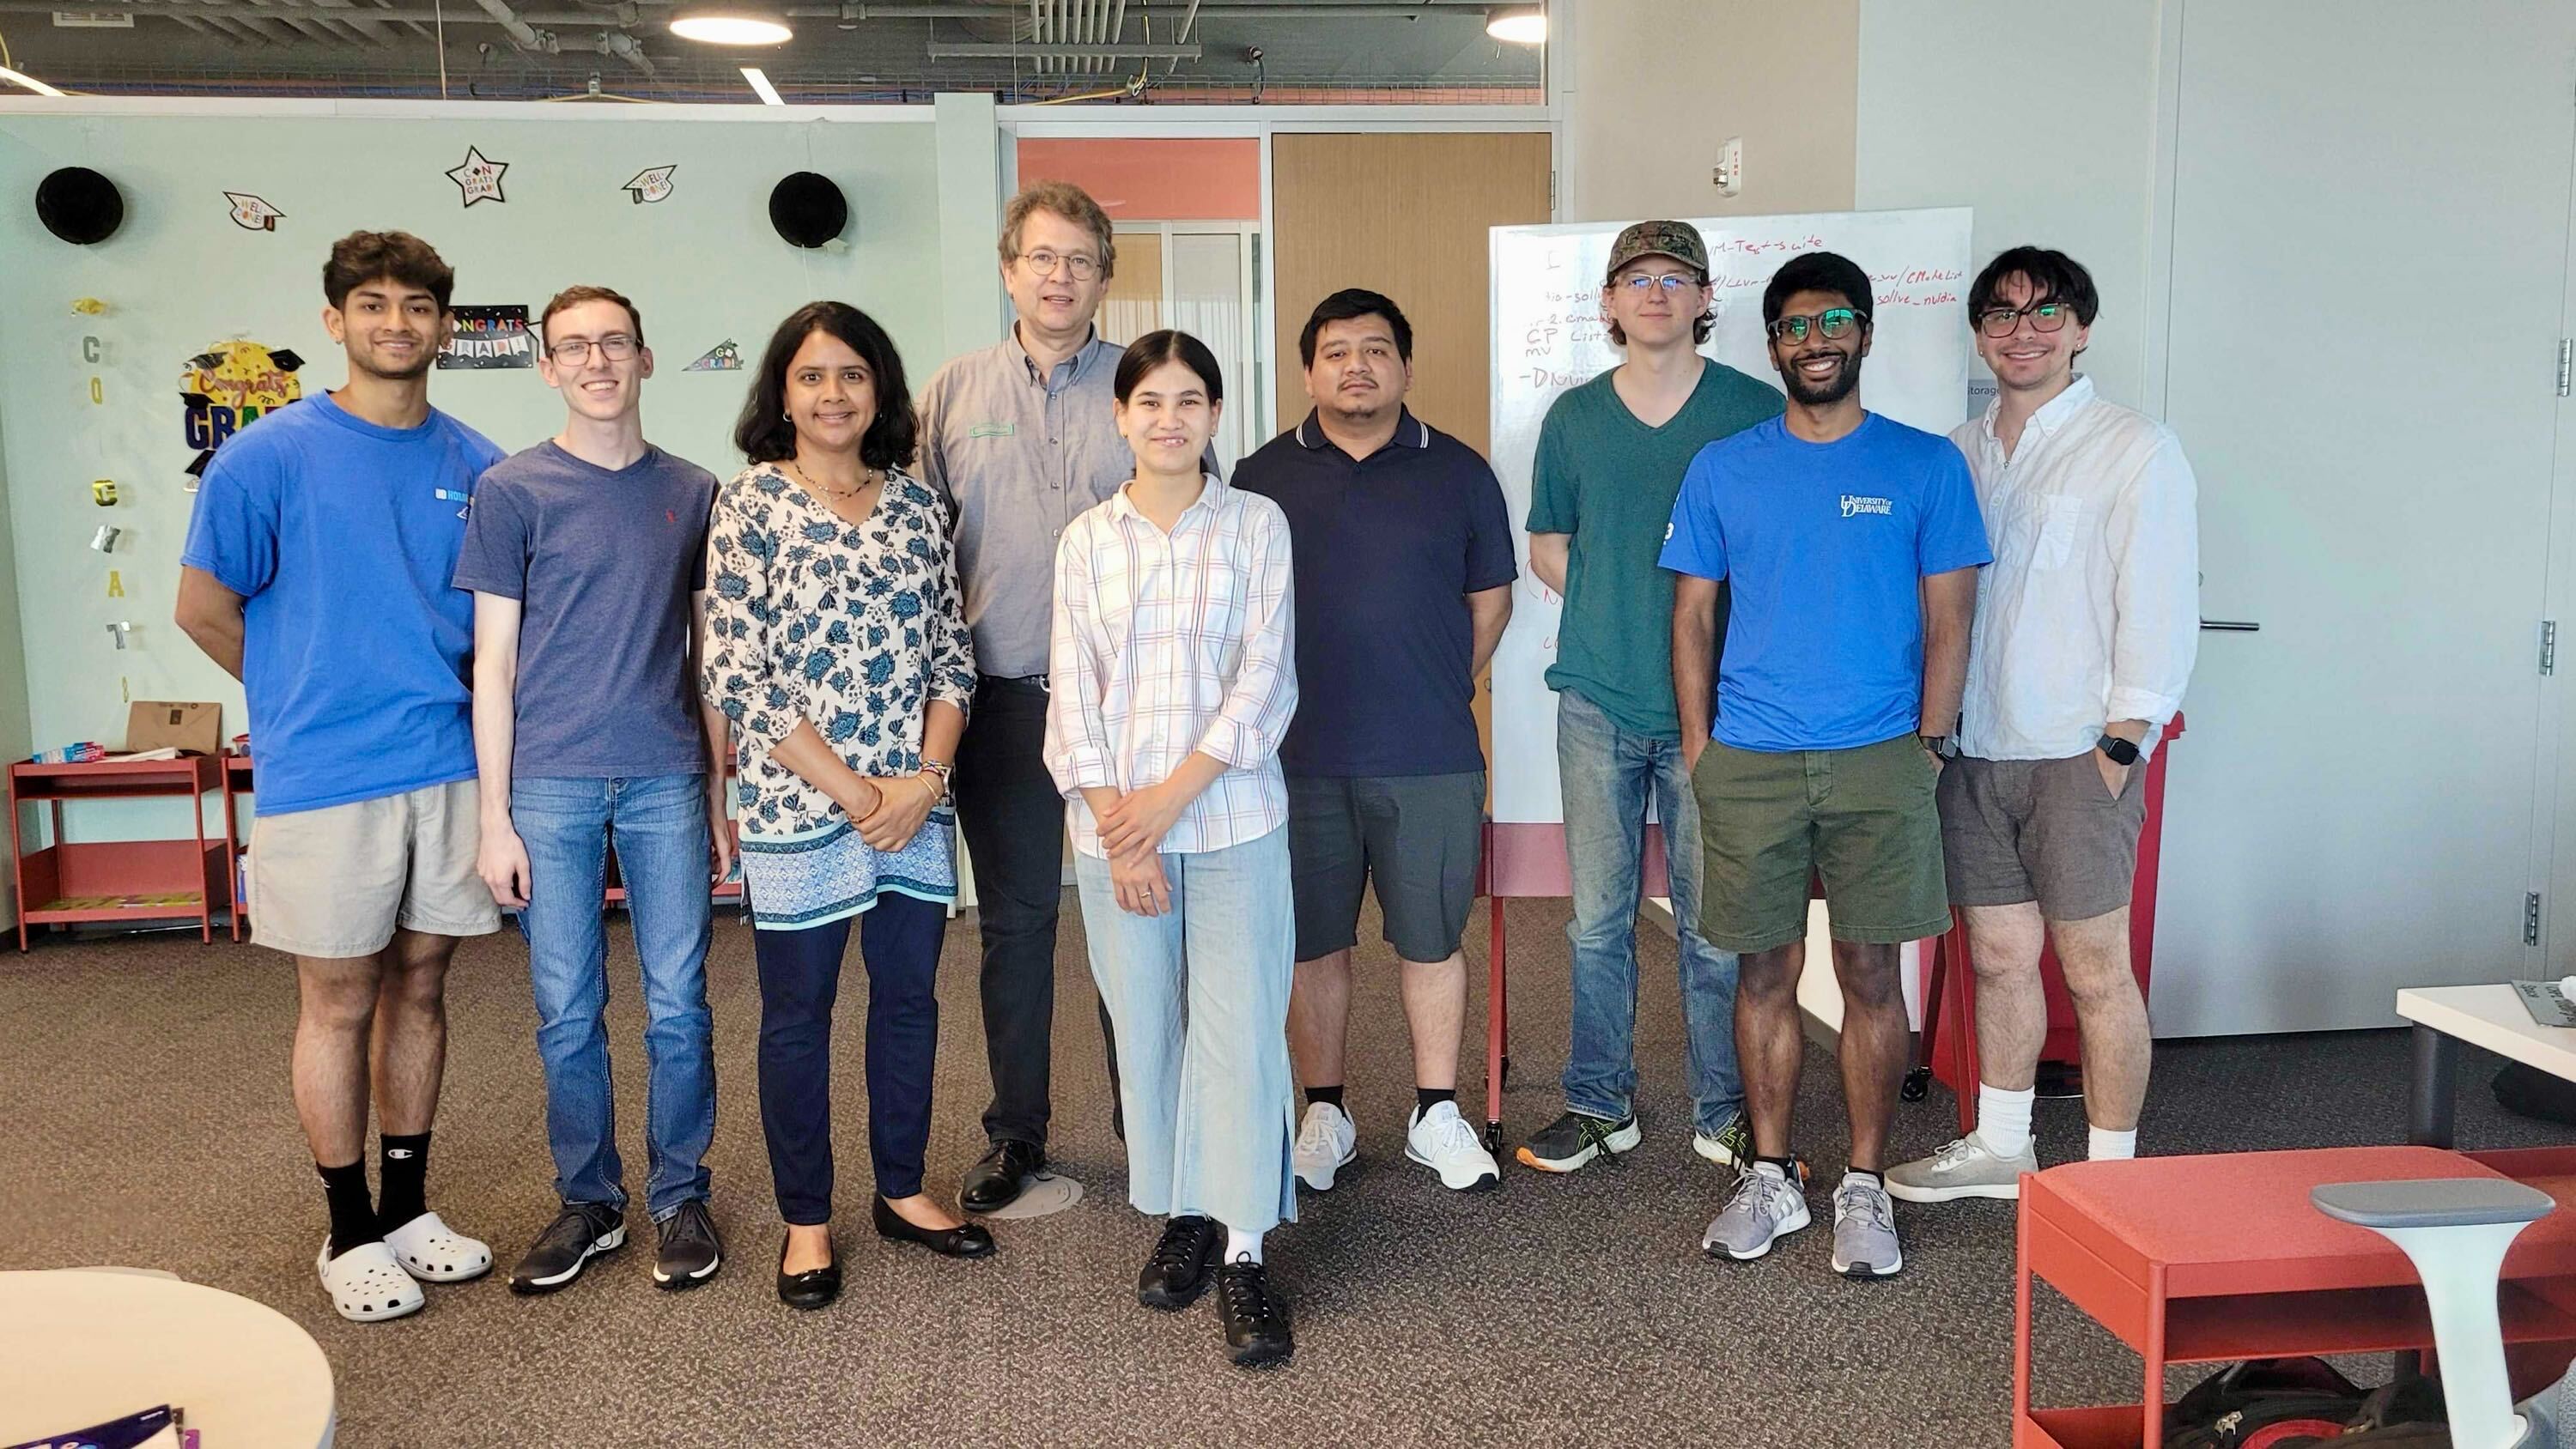 Visit from HPE Researcher Dr. Utz-Uwe Haus